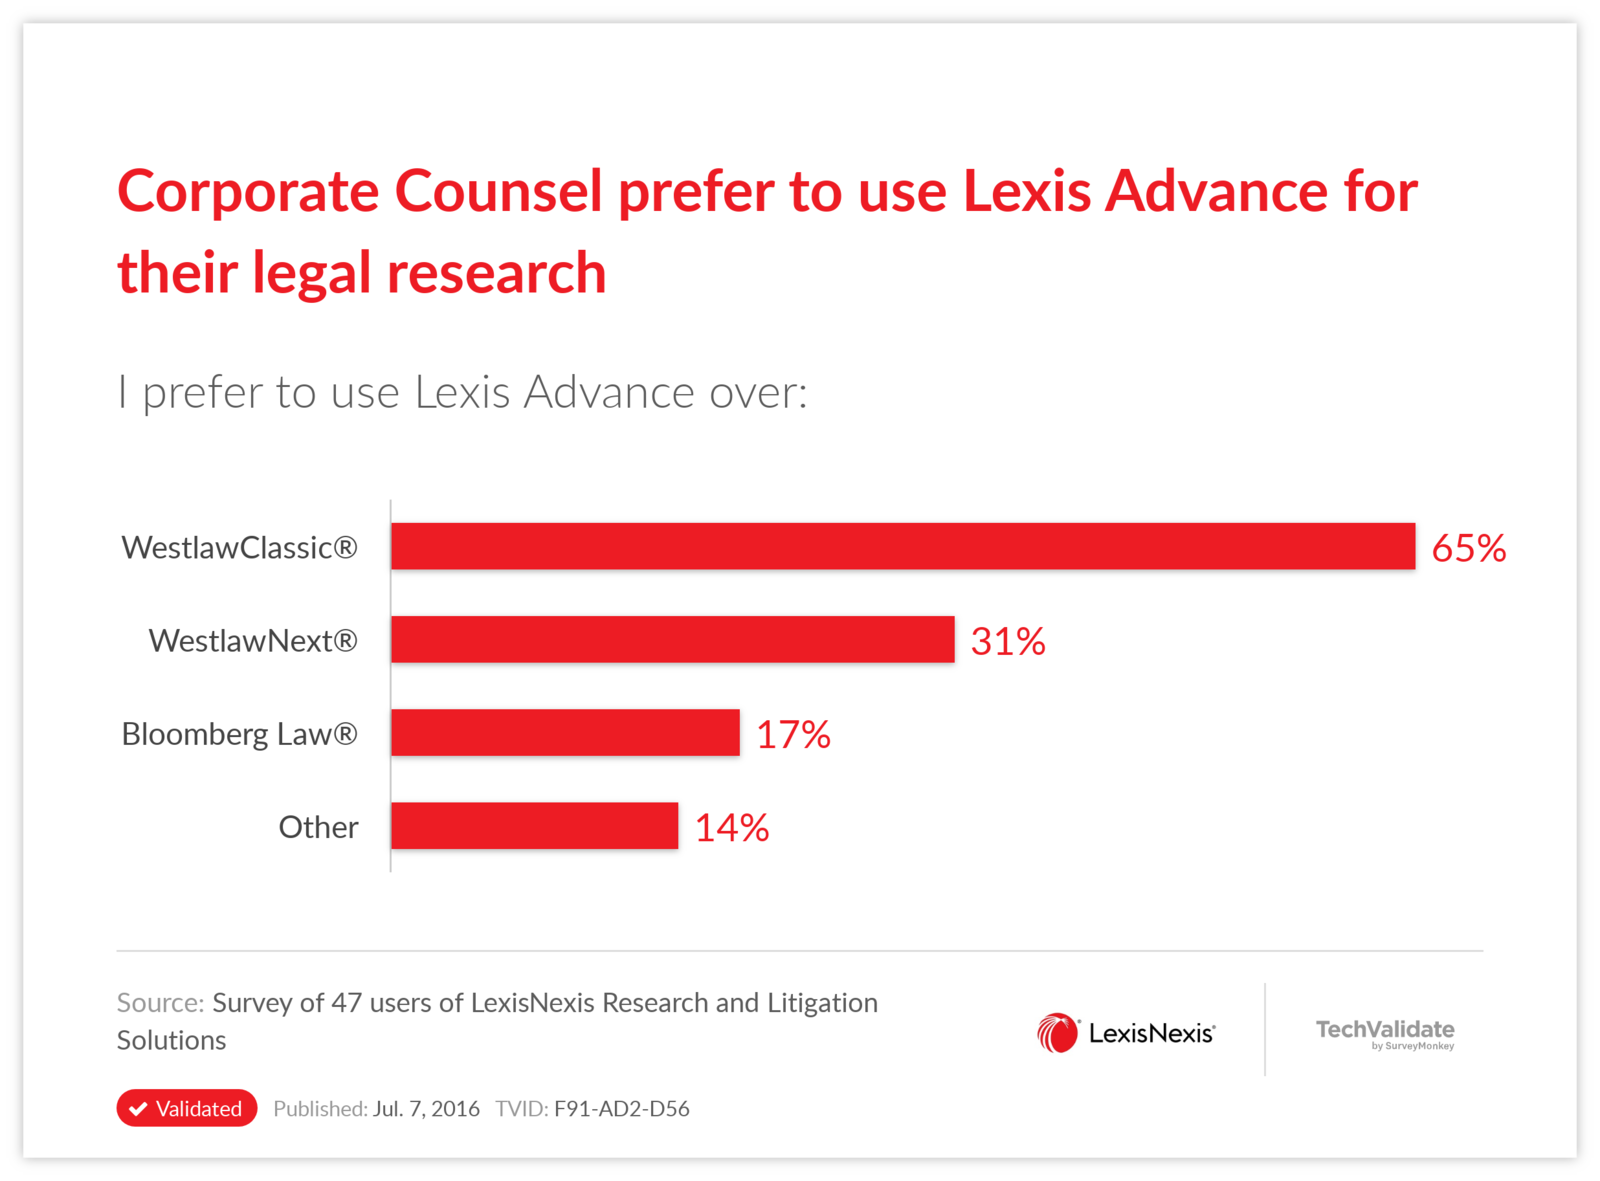 Corporate Counsel prefer to use Lexis Advance for their legal research